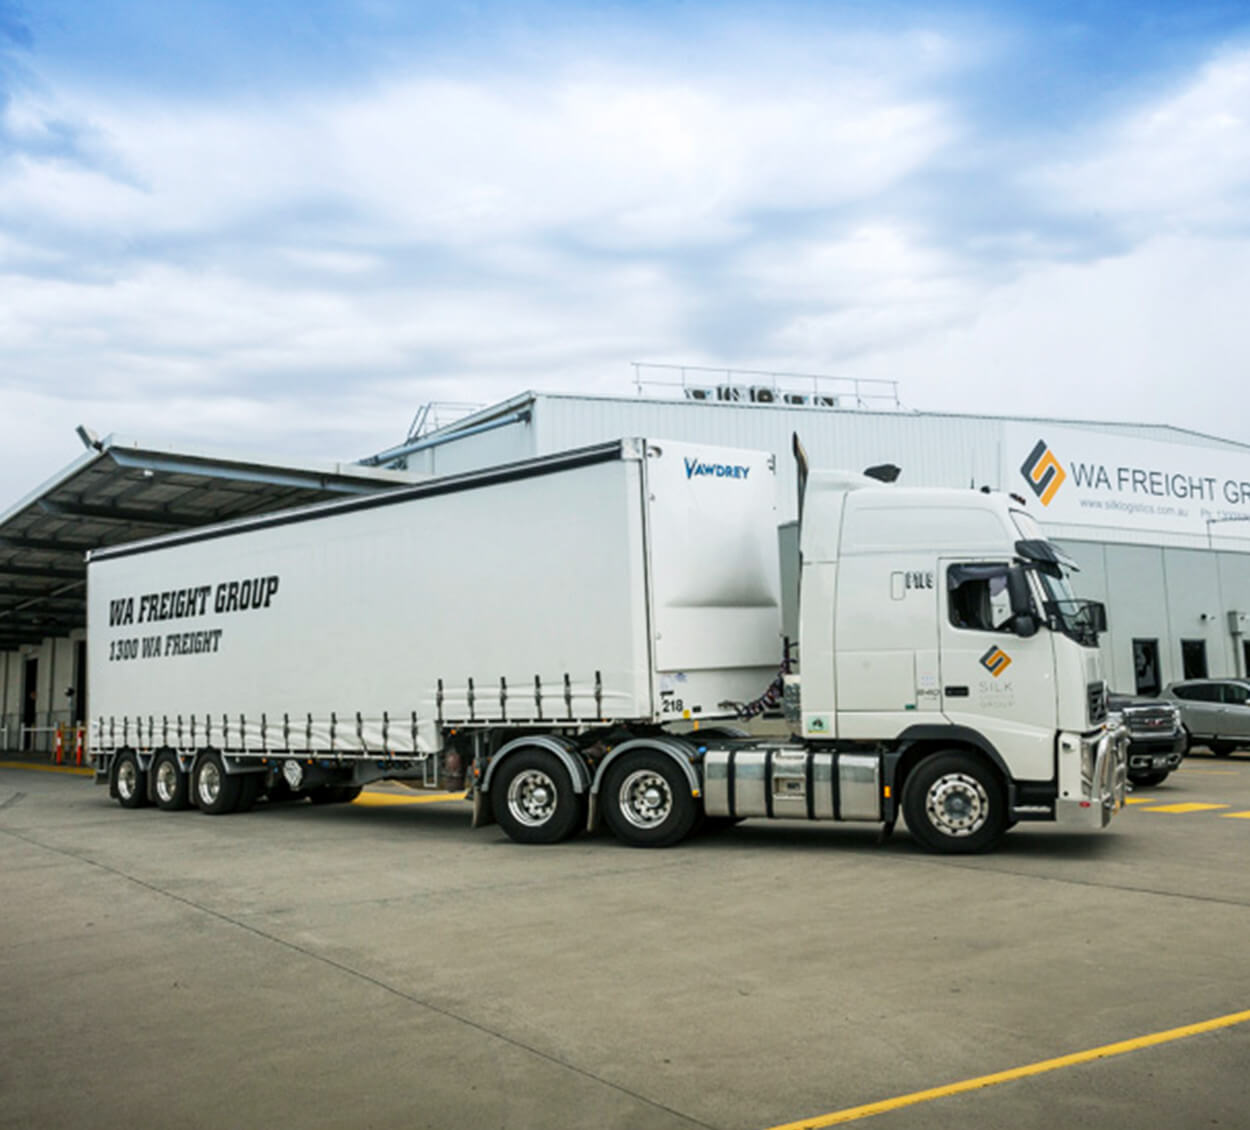 WA Freight Shifted
Gears With Our
Fully Integrated
System